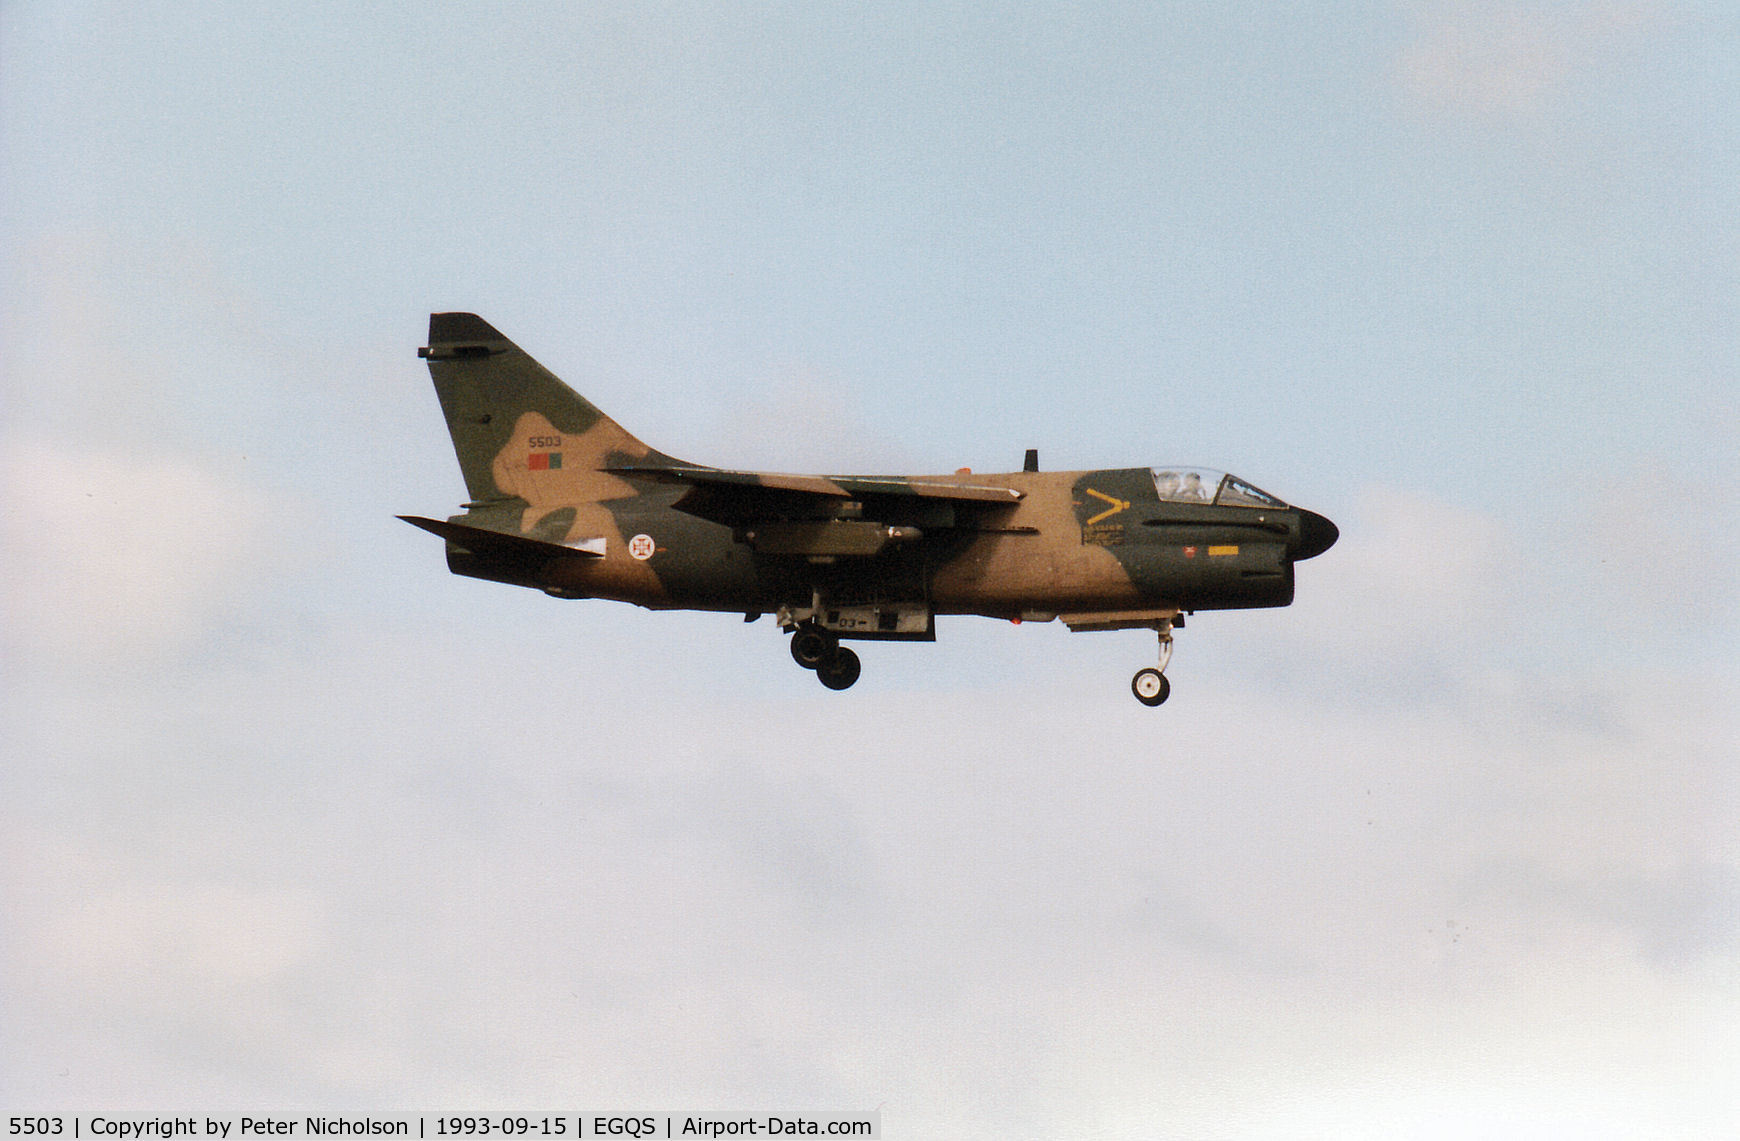 5503, LTV A-7P Corsair II C/N A-182/P-003, Portuguese Air Force A-7P Corsair II of 304 Esquadron on final approach to Runway 05 at RAF Lossiemouth in September 1993.